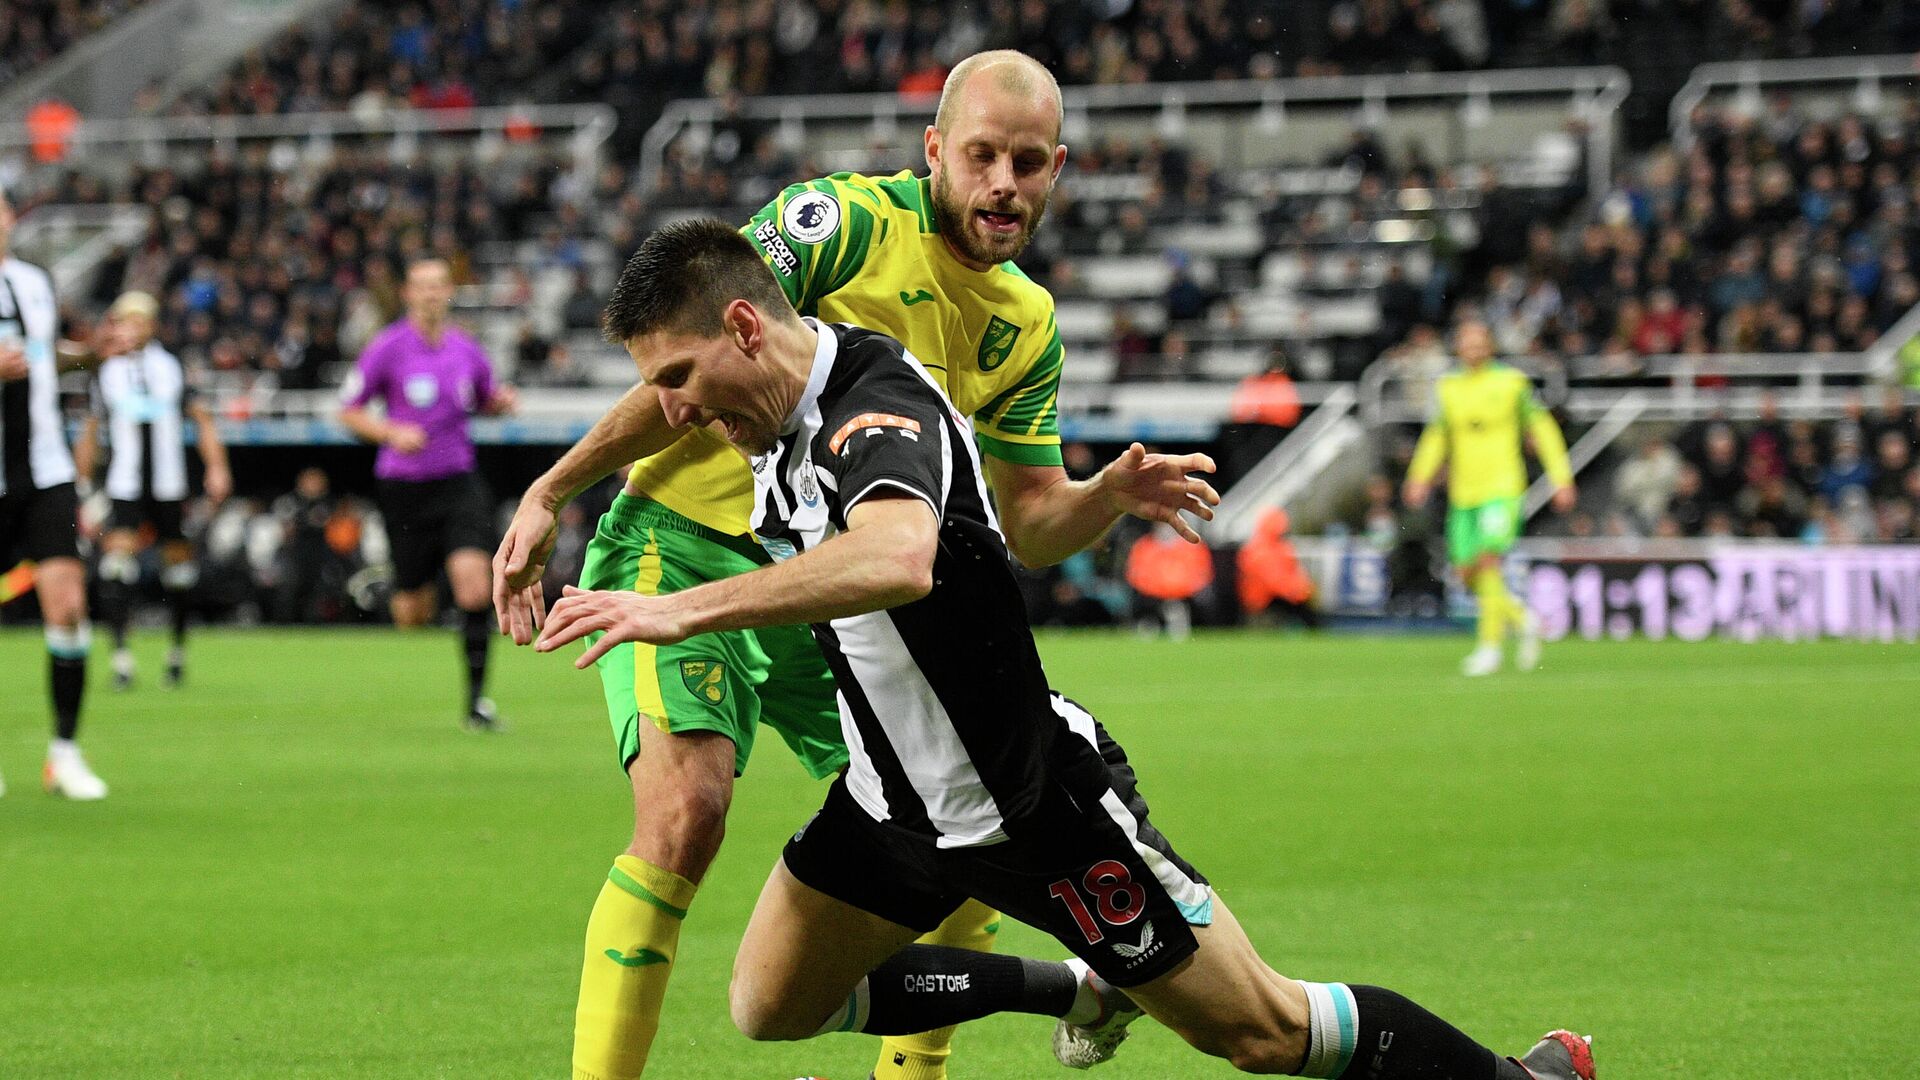 Newcastle United's Argentinian defender Federico Fernandez (R) vies with Norwich City's Finnish striker Teemu Pukki during the English Premier League football match between Newcastle United and Norwich City at St James' Park in Newcastle-upon-Tyne, north east England on November 30, 2021. (Photo by Oli SCARFF / AFP) / RESTRICTED TO EDITORIAL USE. No use with unauthorized audio, video, data, fixture lists, club/league logos or 'live' services. Online in-match use limited to 120 images. An additional 40 images may be used in extra time. No video emulation. Social media in-match use limited to 120 images. An additional 40 images may be used in extra time. No use in betting publications, games or single club/league/player publications. /  - РИА Новости, 1920, 01.12.2021